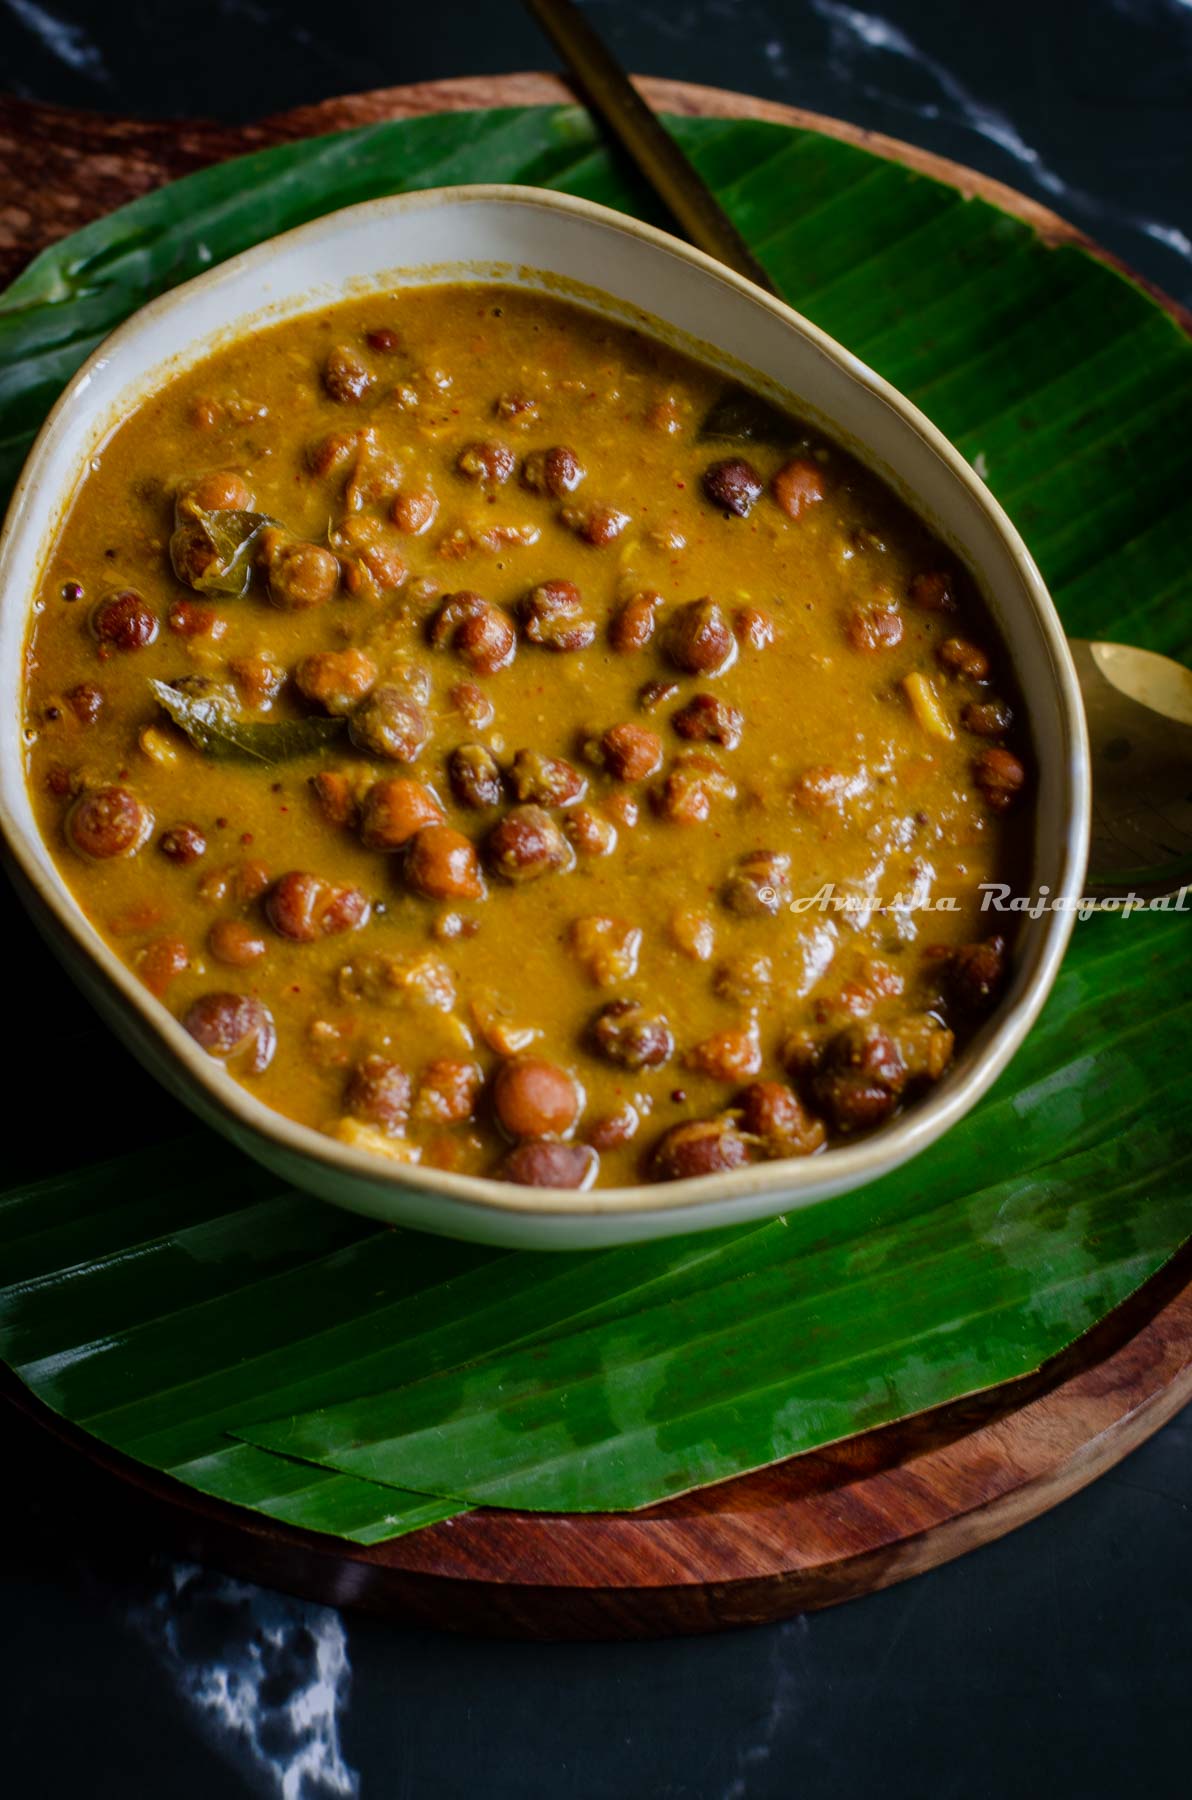 South Indian style brown chickpeas curry served in a beige bowl